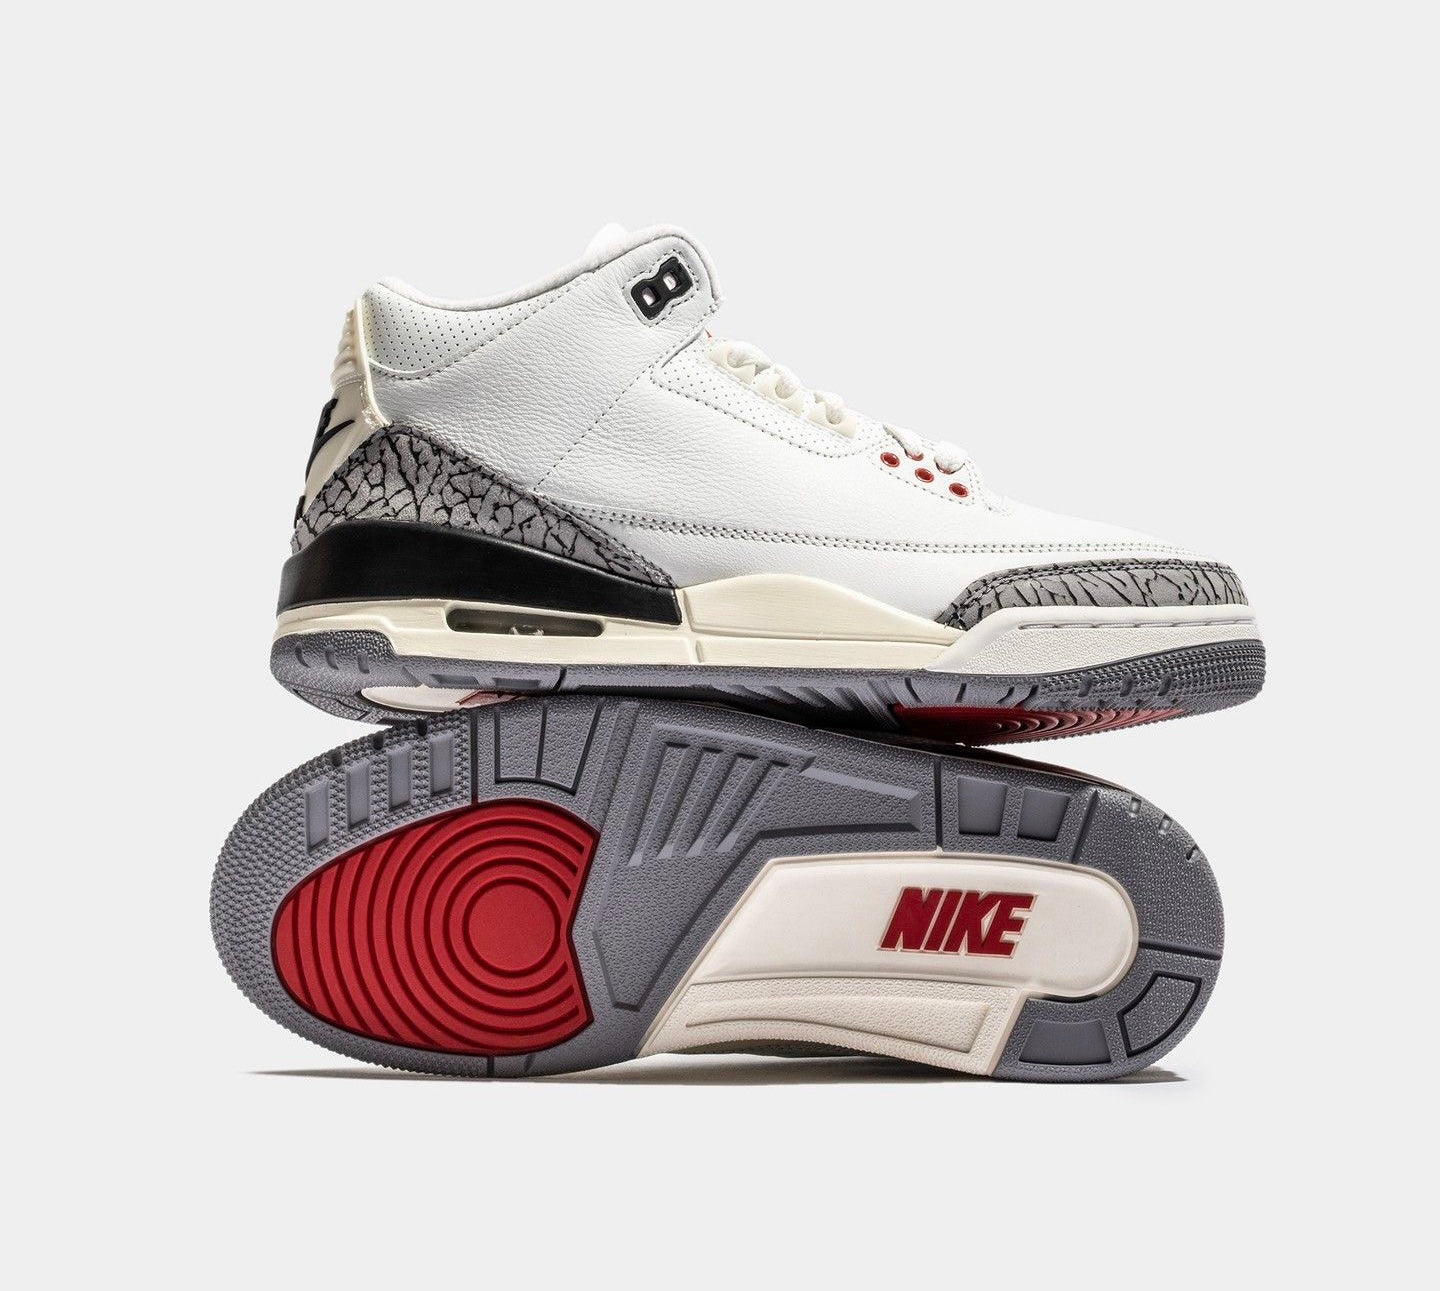 Reimagined: The Air Jordan 3 White Cement Makes a Comeback!